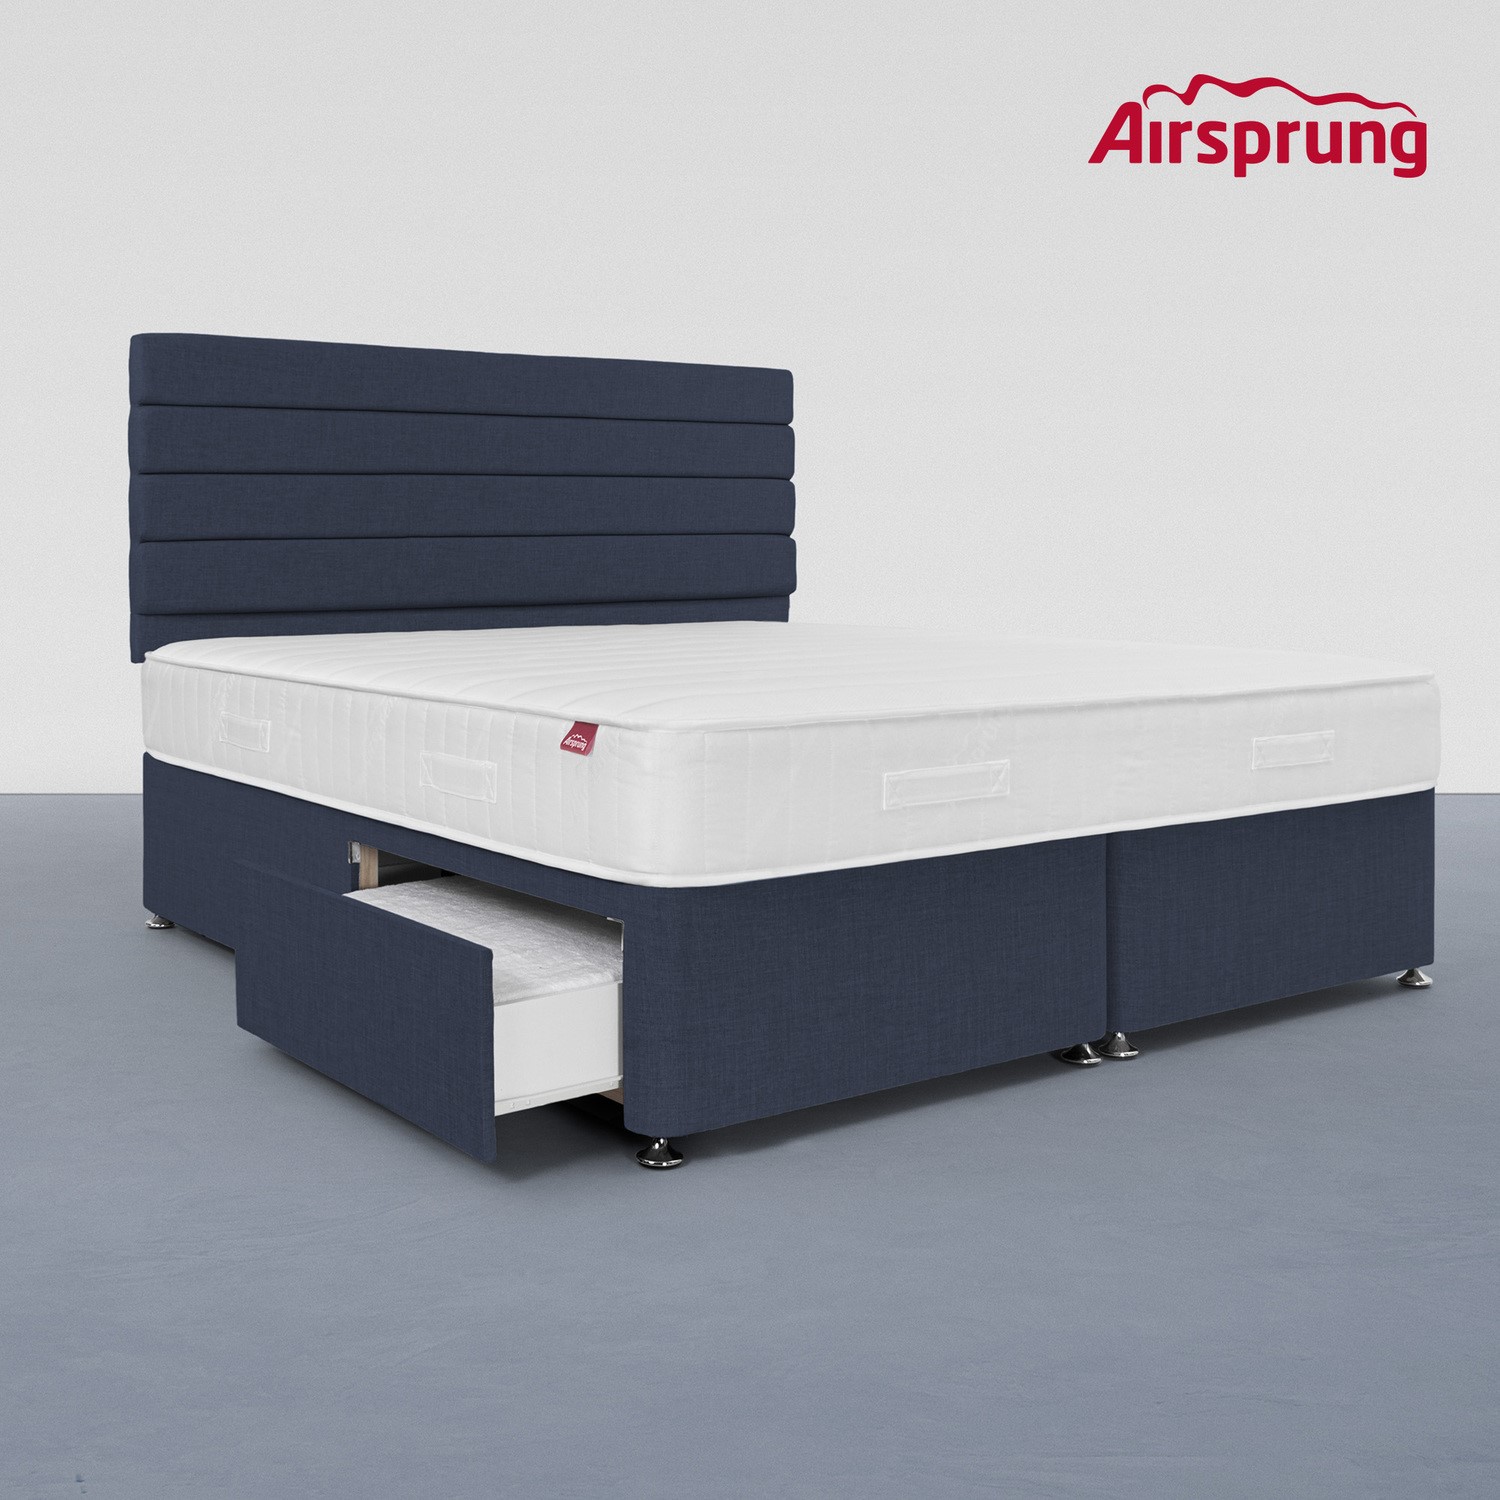 Read more about Airsprung super king 2 drawer divan bed with comfort mattress midnight blue